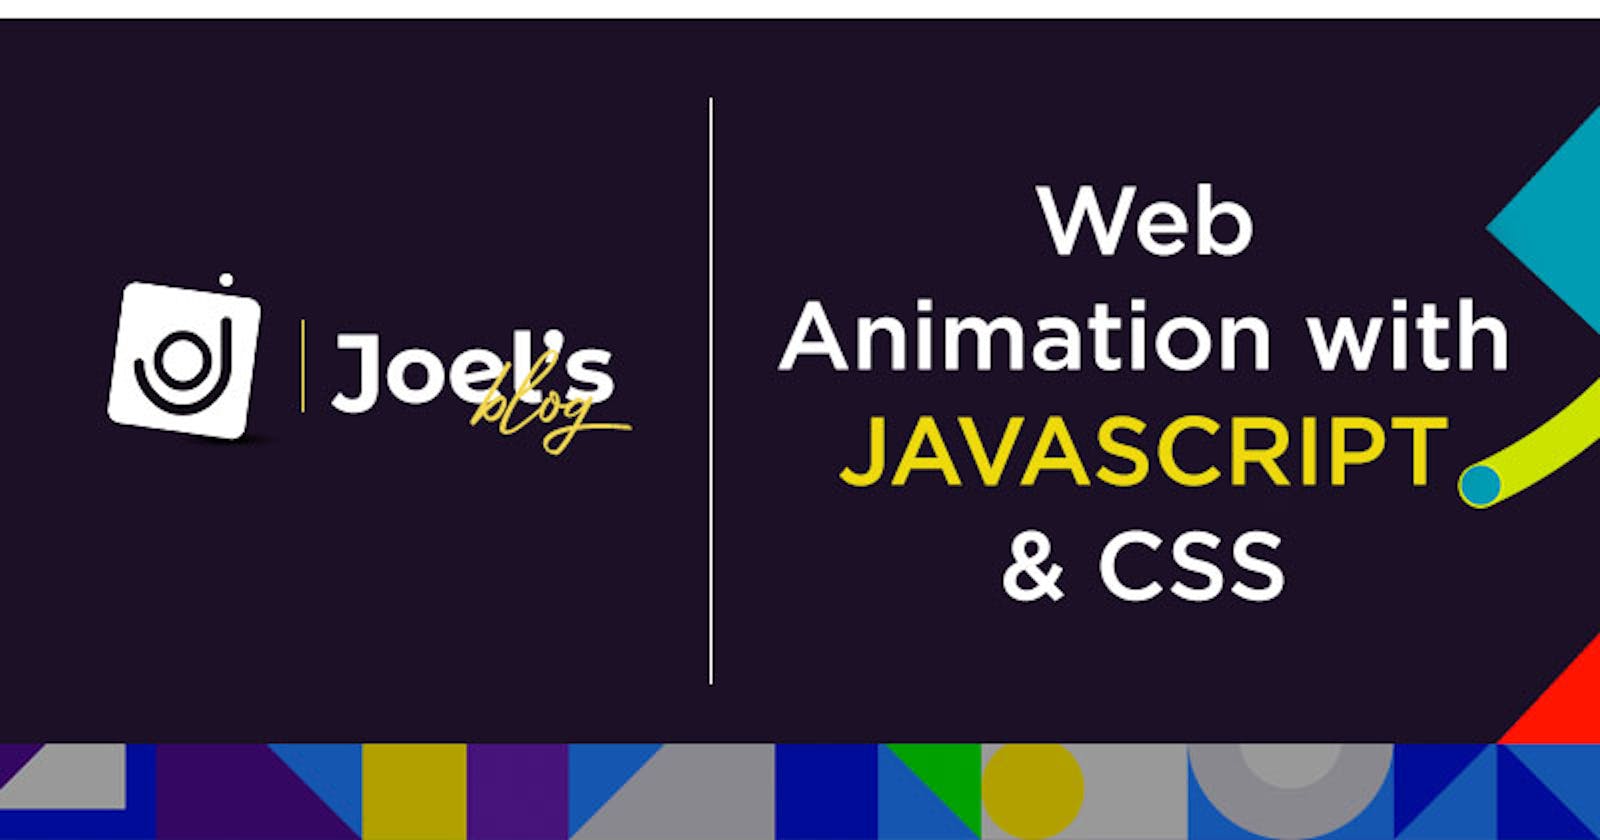 Web Animation with JavaScript and CSS